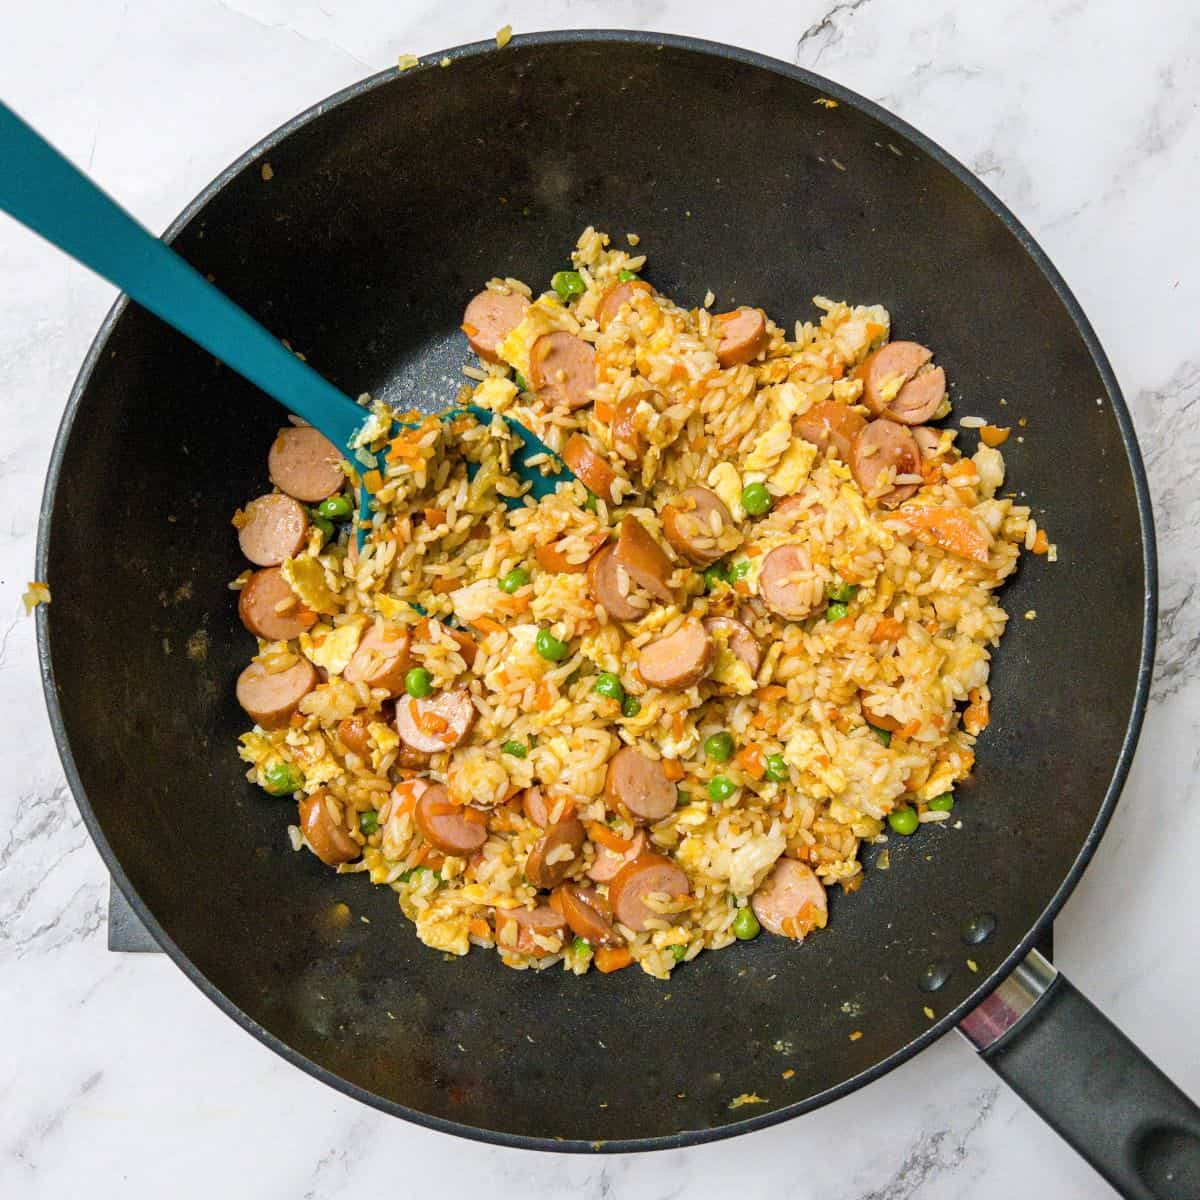 Hot dog fried rice in a wok.